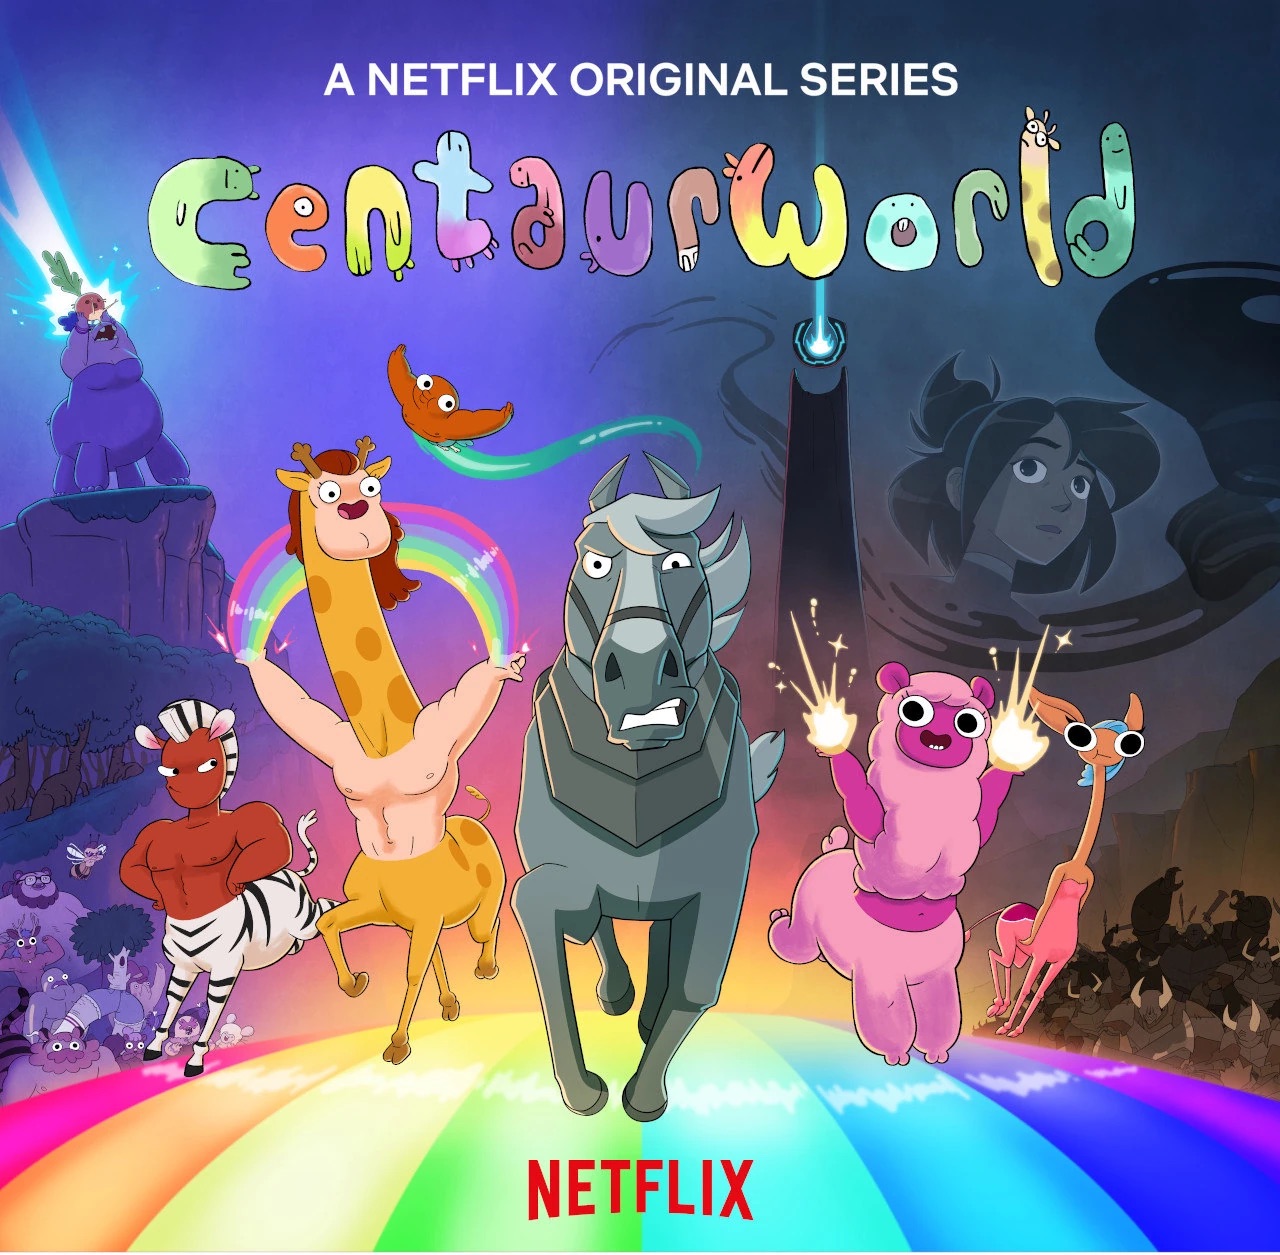 Rebelle Re-Views: ‘Centaurworld’ and The Discovery of Self through Found Family